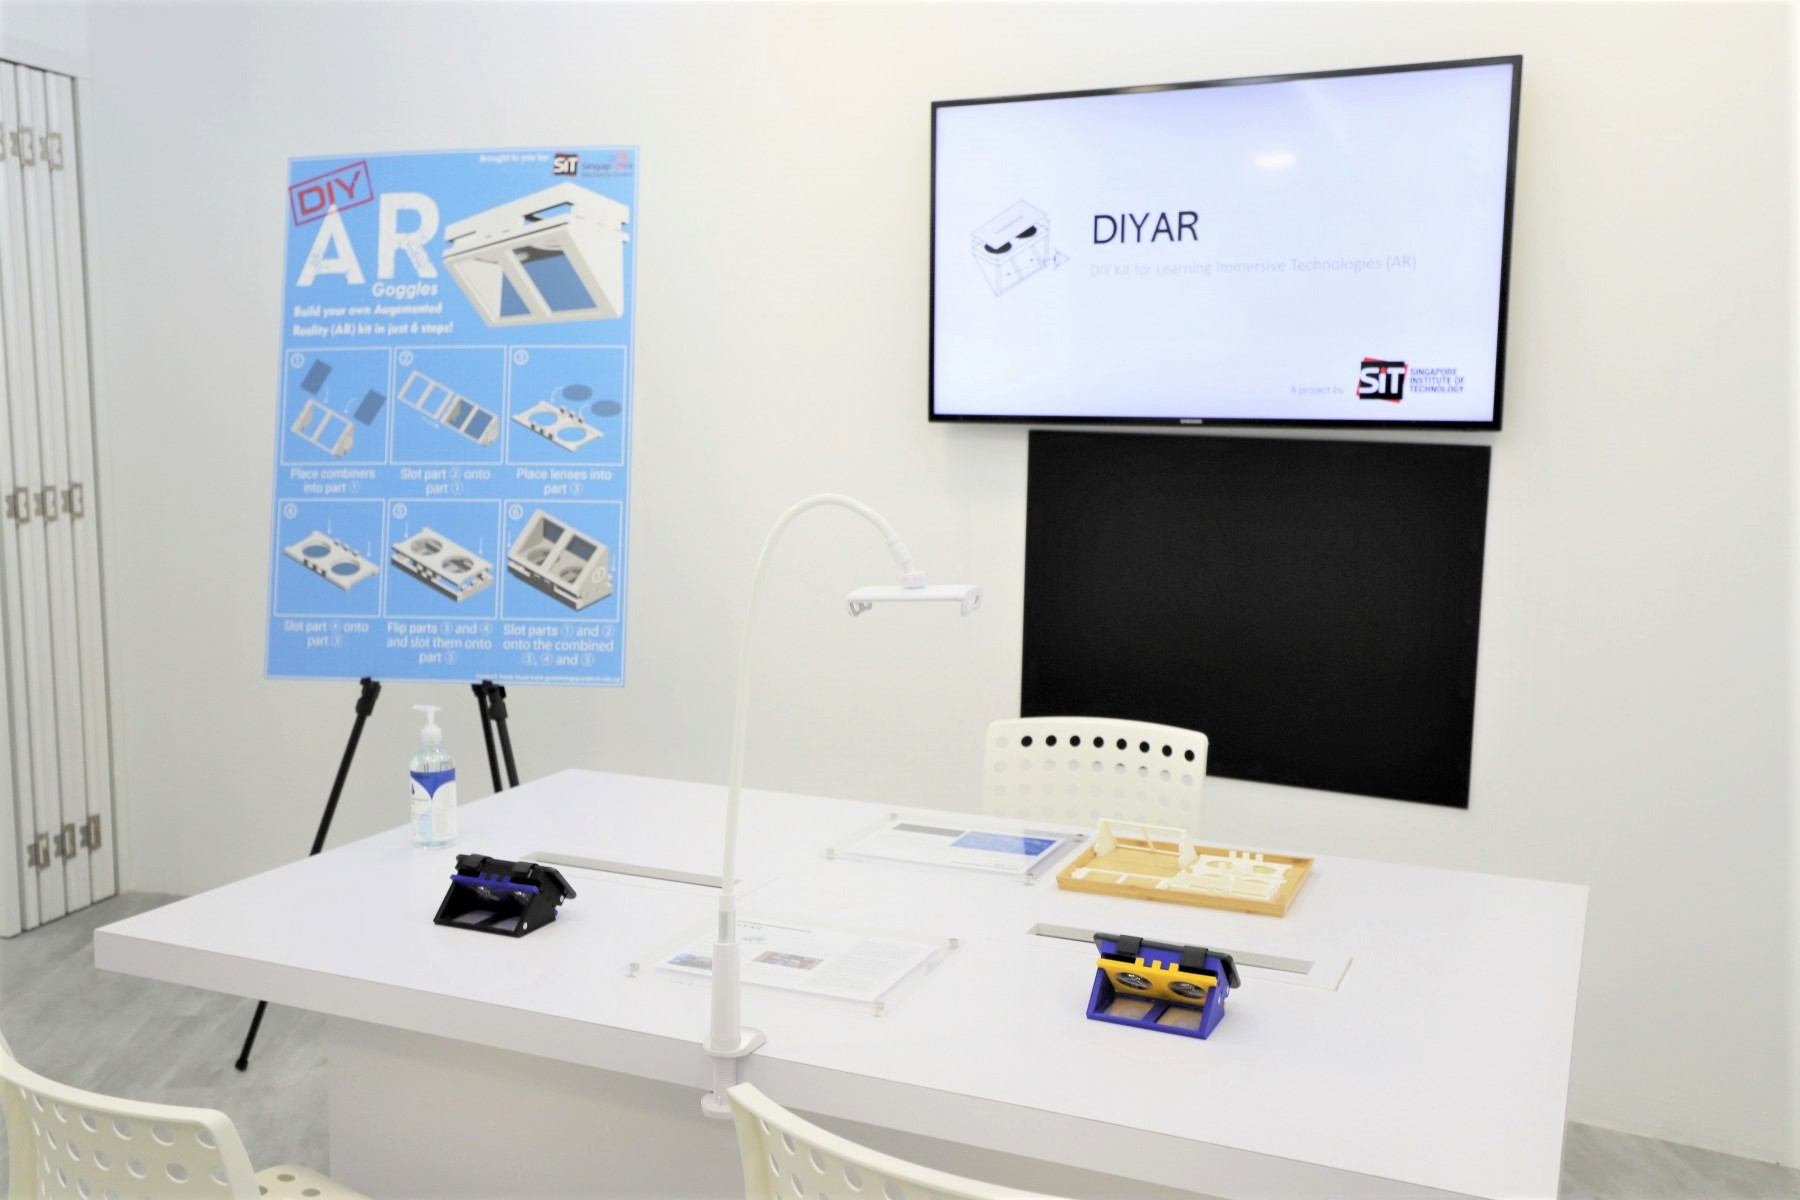 SIT students’ DIYAR goggles are showcased at the X-Lab, located in the Permanent Exhibits Gallery – Sandbox, where SDC collaborates with IHLs to co-create and showcase innovative projects in immersive technologies.